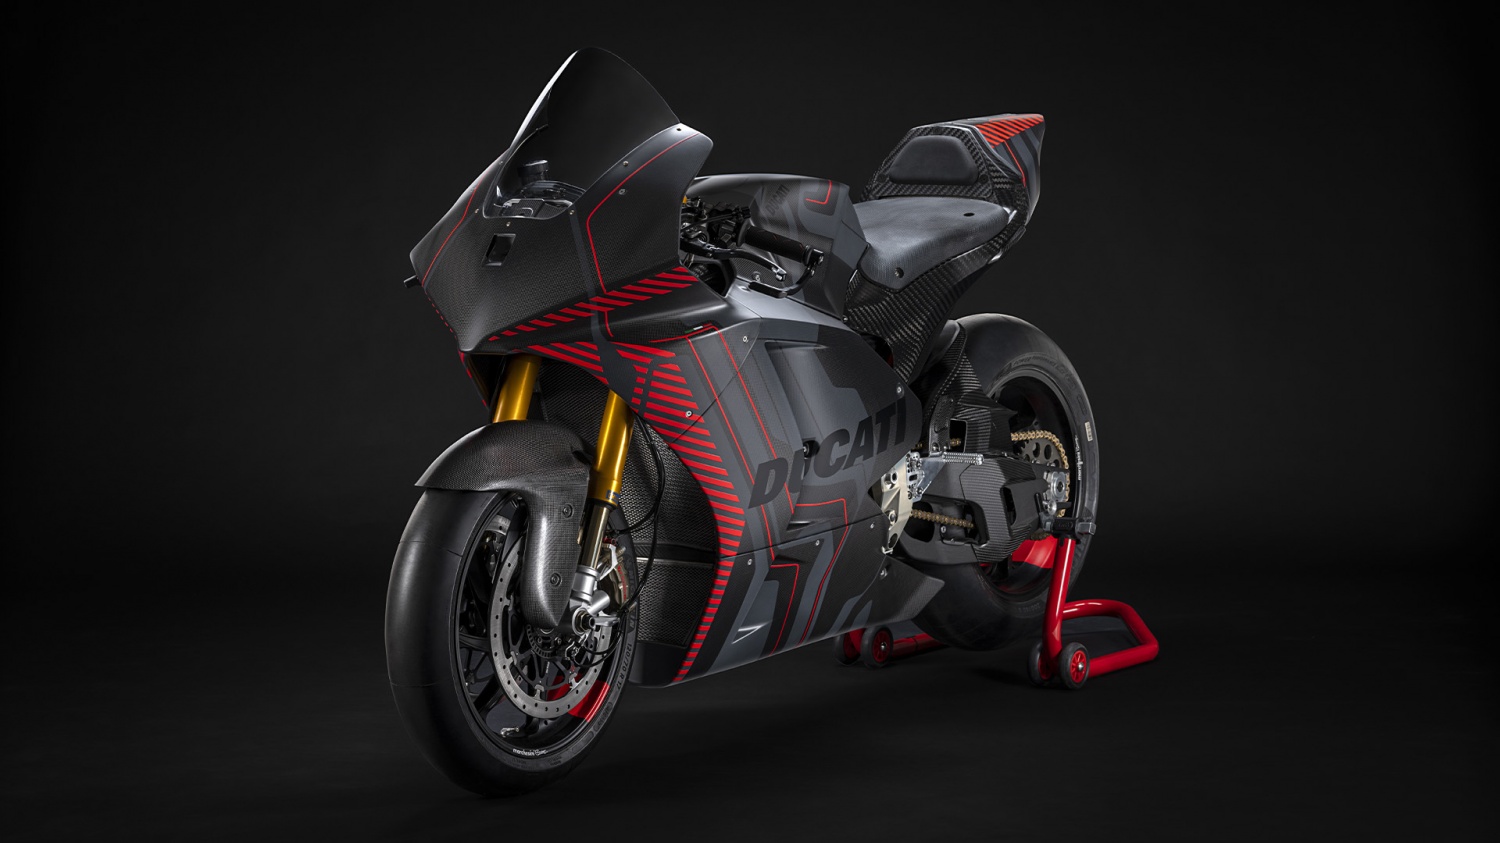 Ducati showcases its first electric motorcycle the V21L. 